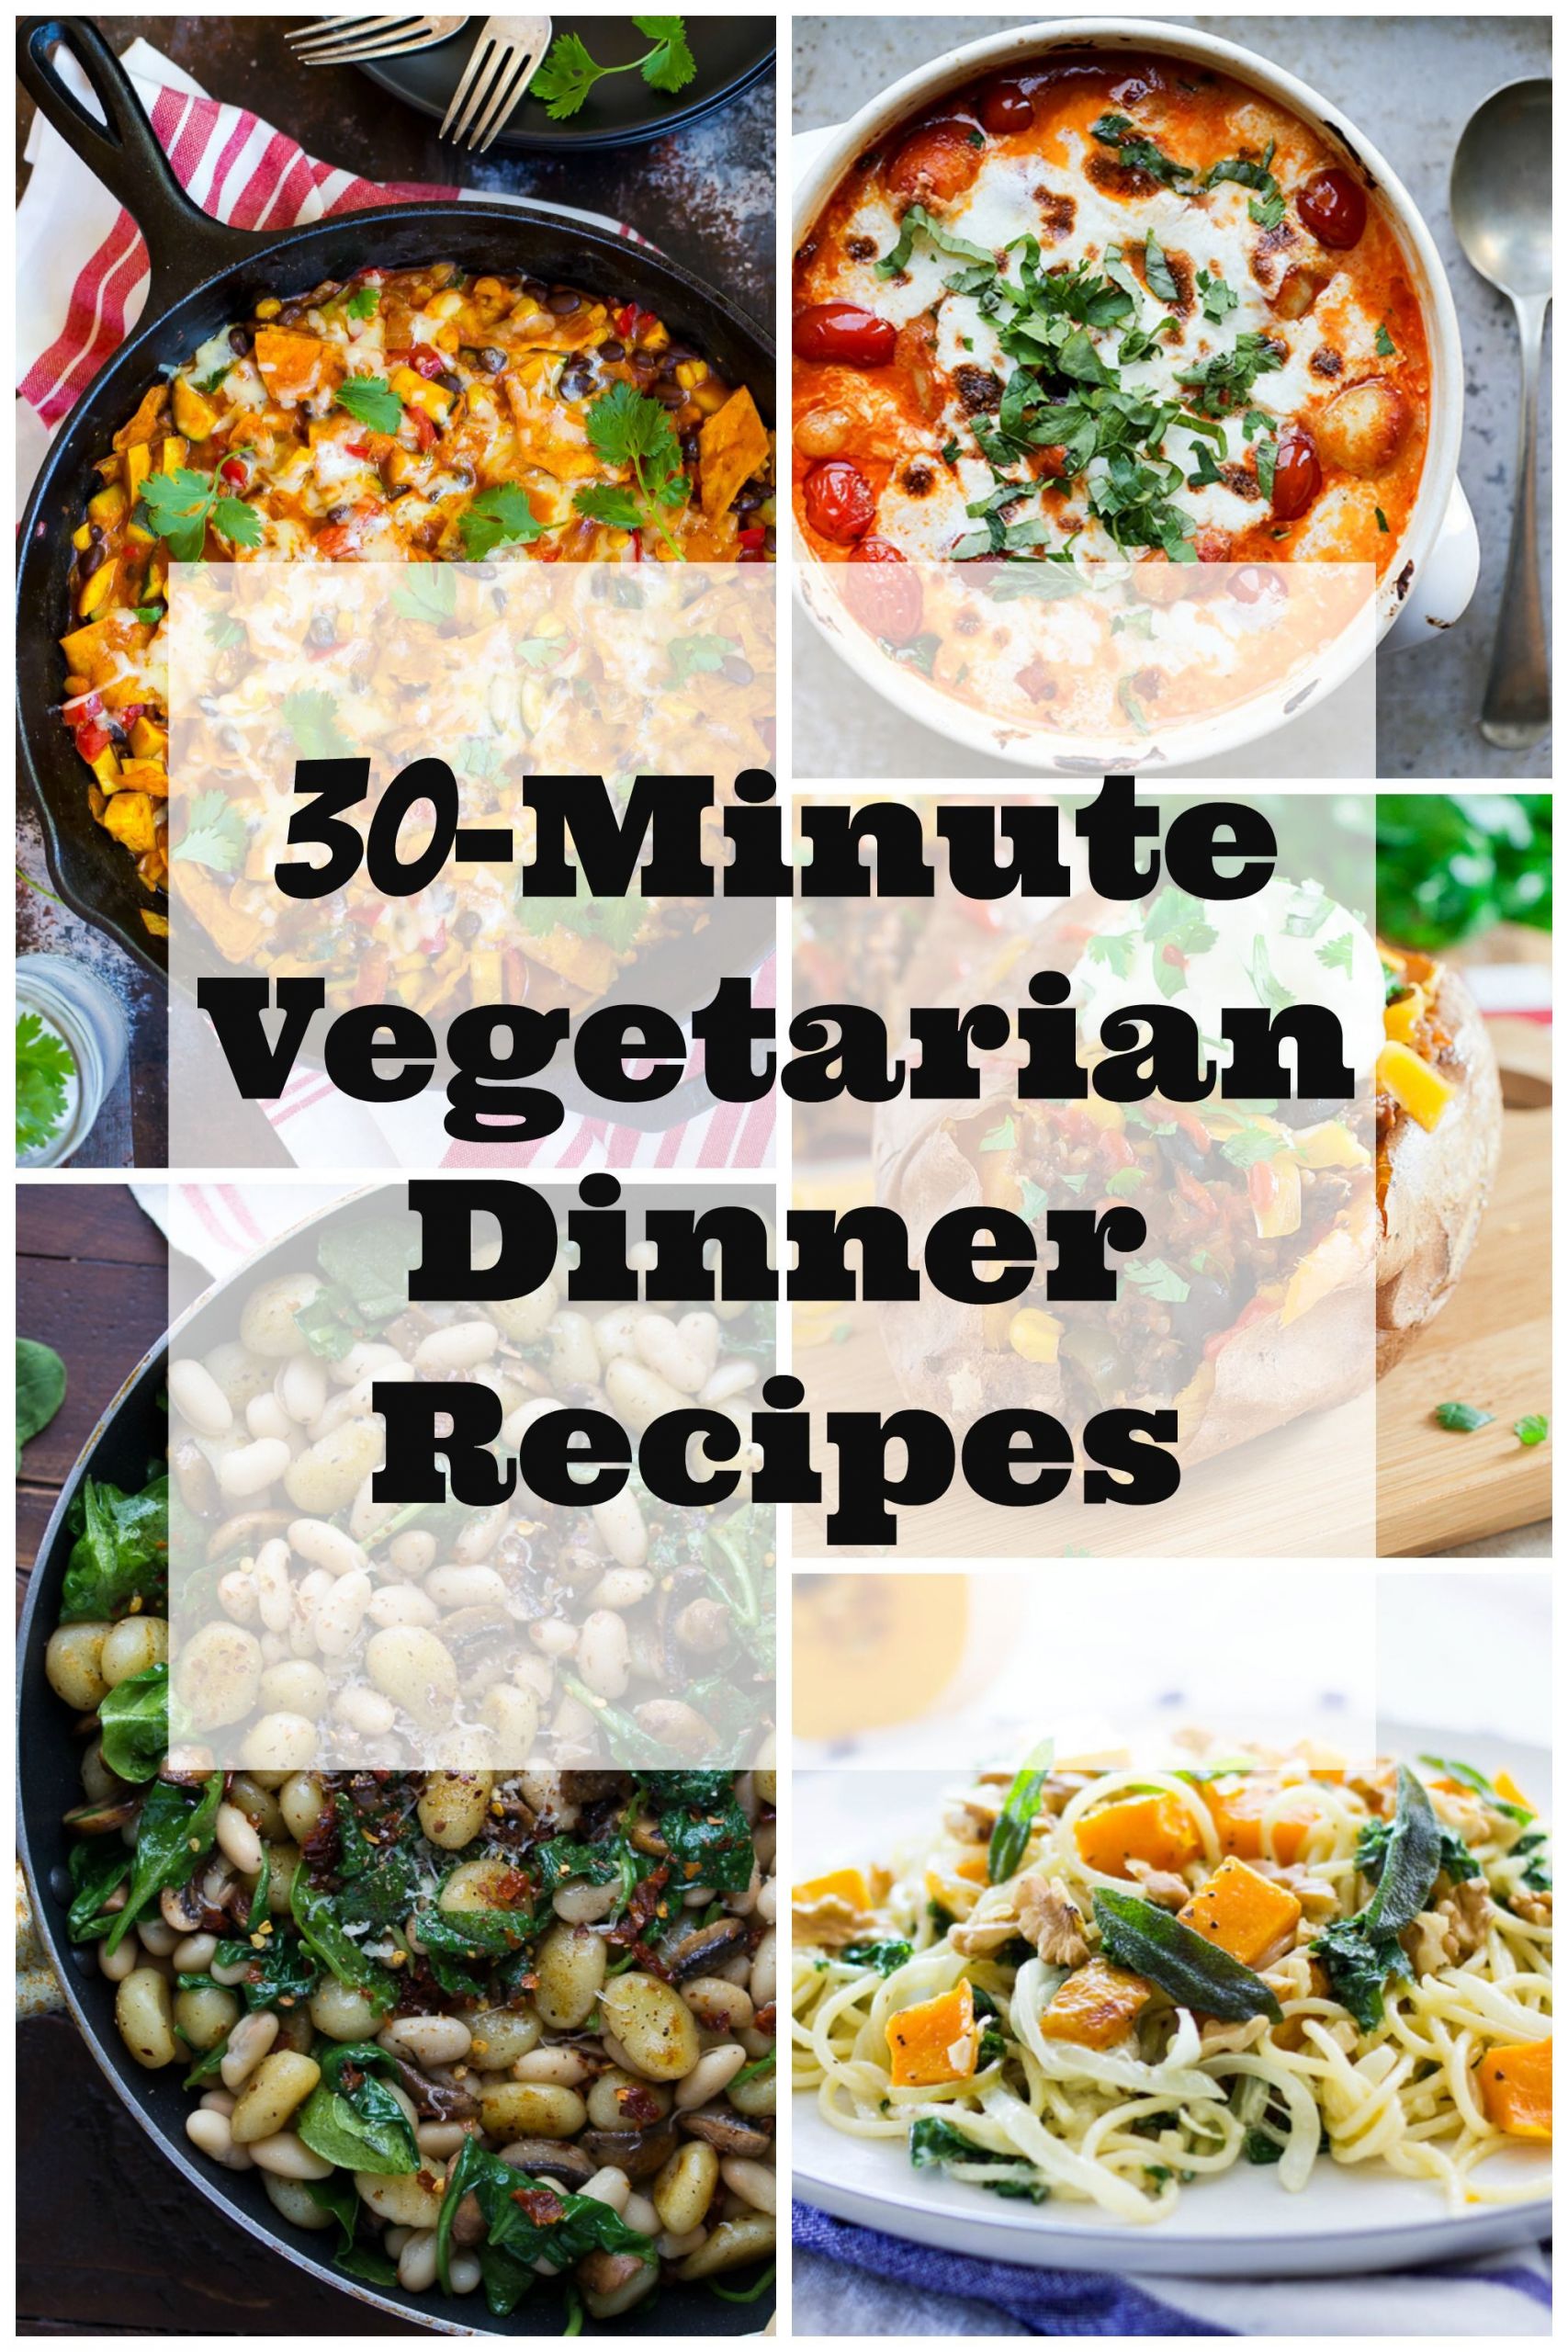 Easy Vegetarian Dinners For Two
 30 Minute Ve arian Dinner Recipes Tons of delicious and